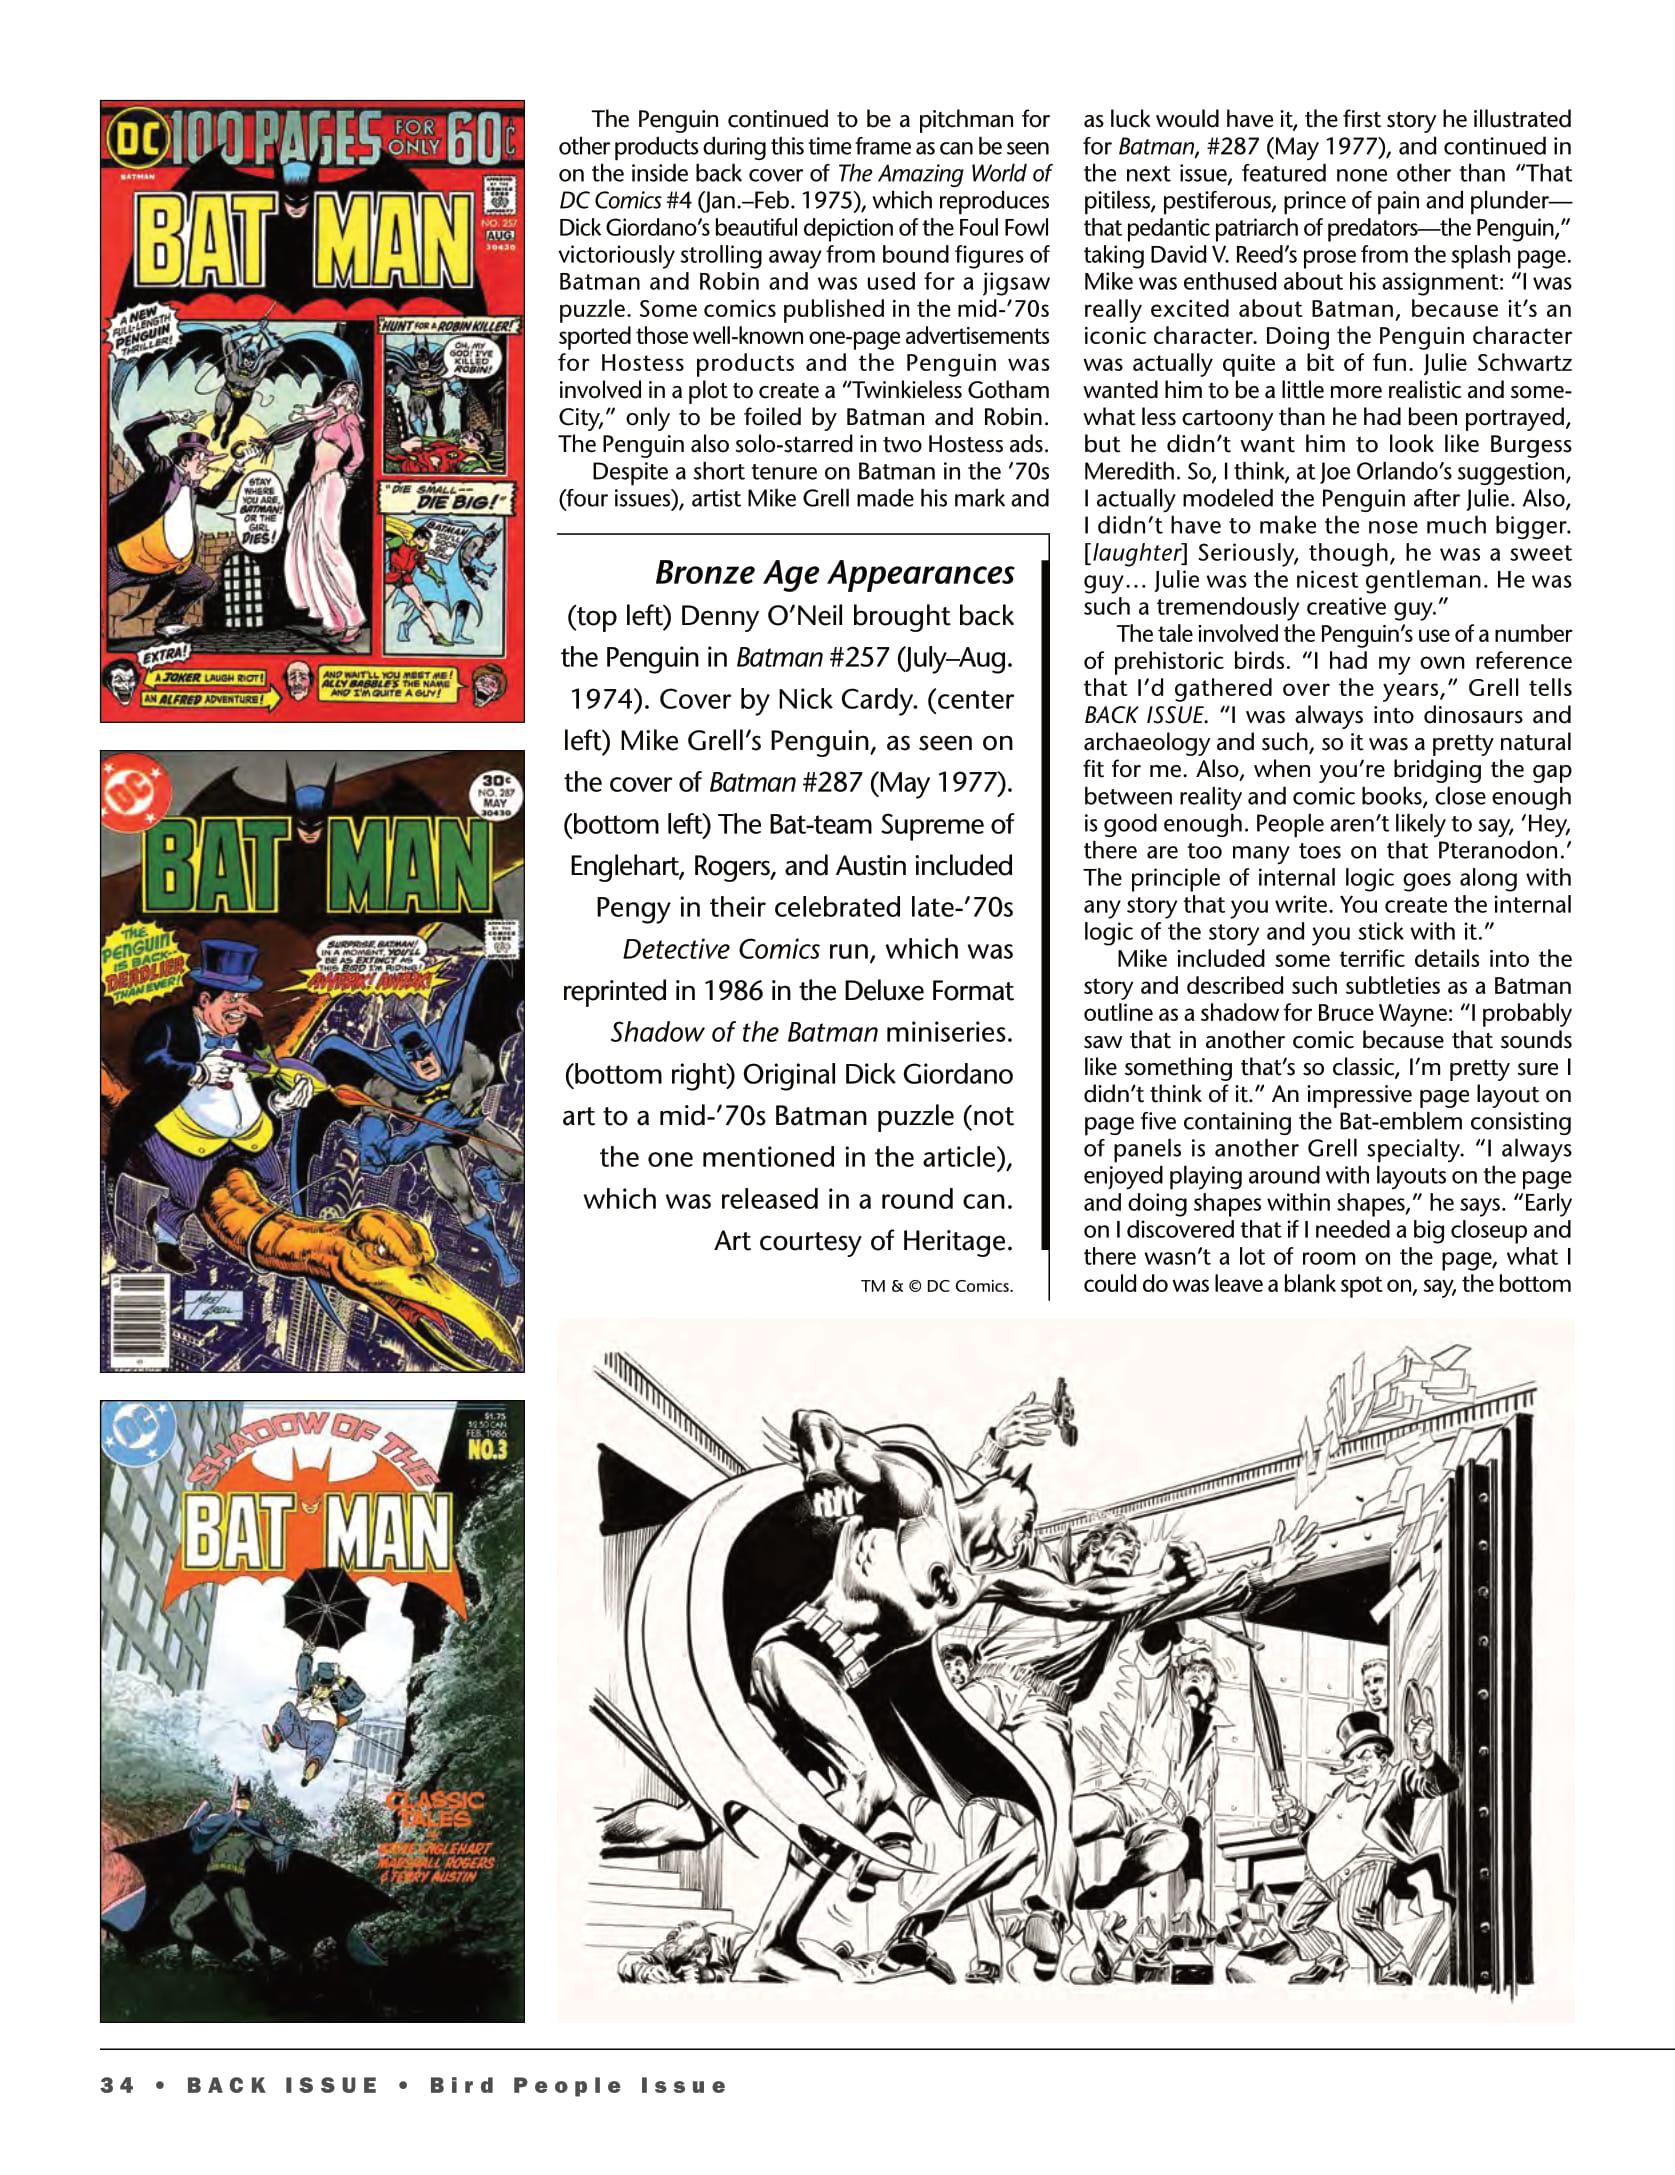 Read online Back Issue comic -  Issue #97 - 36